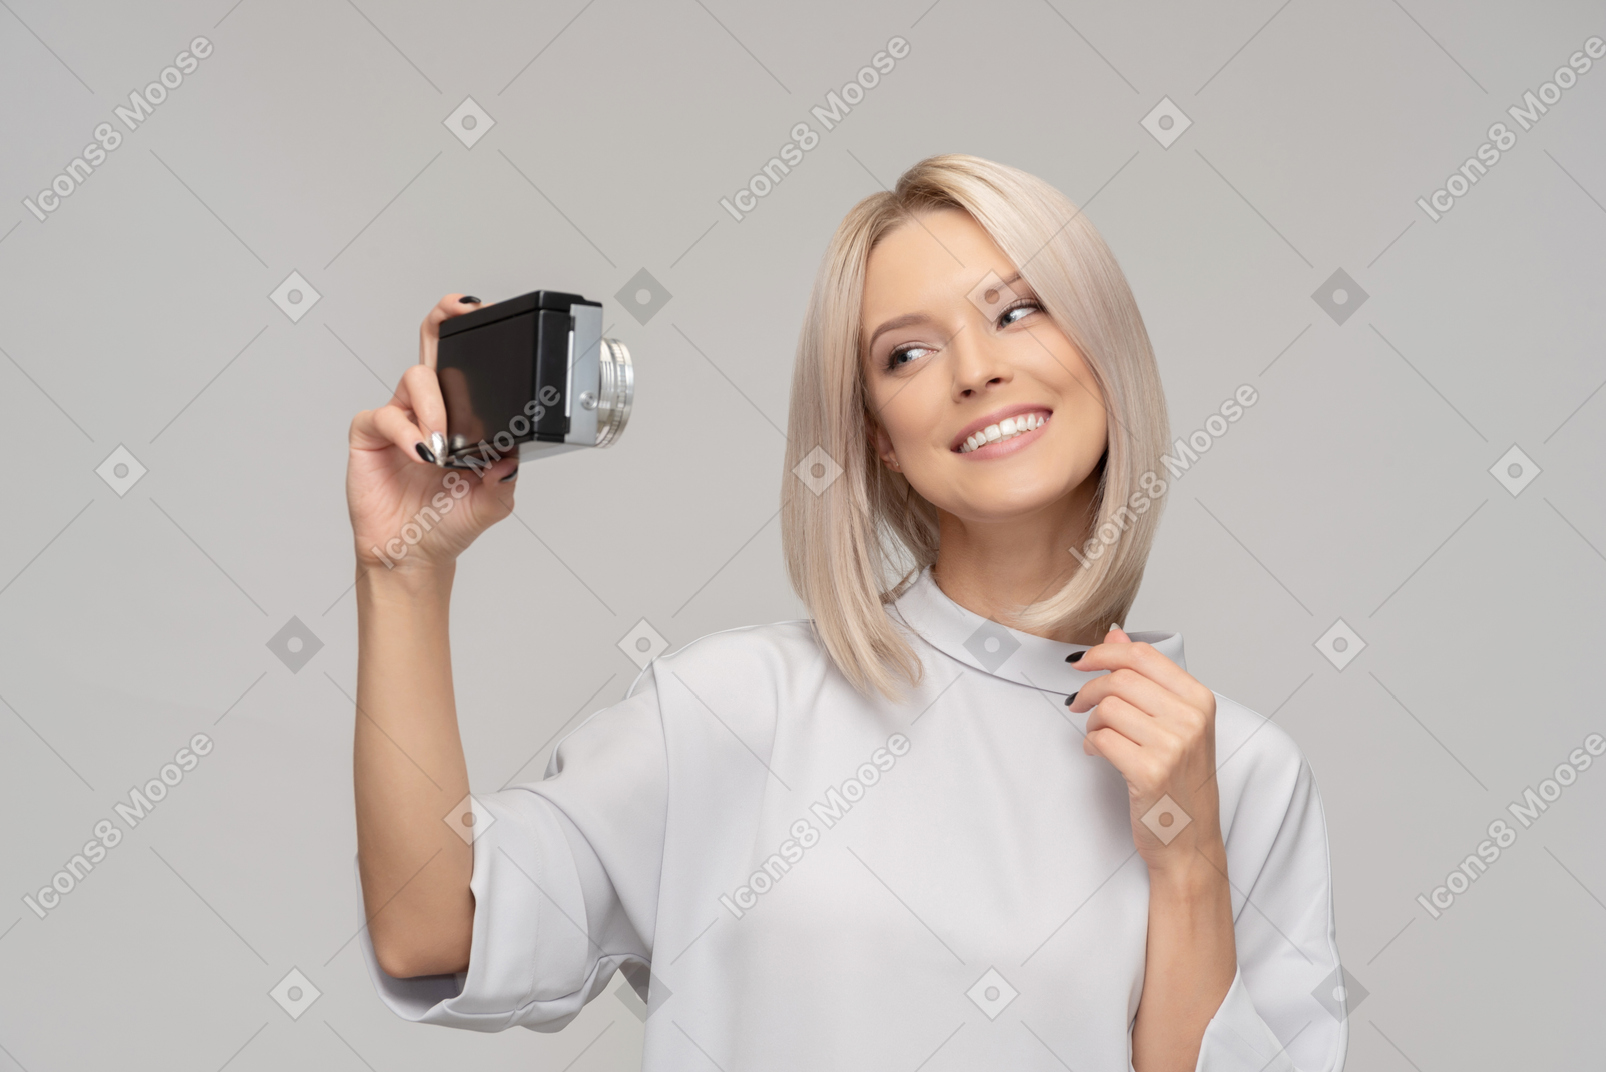 Smiling young woman taking a selfie with an old camera